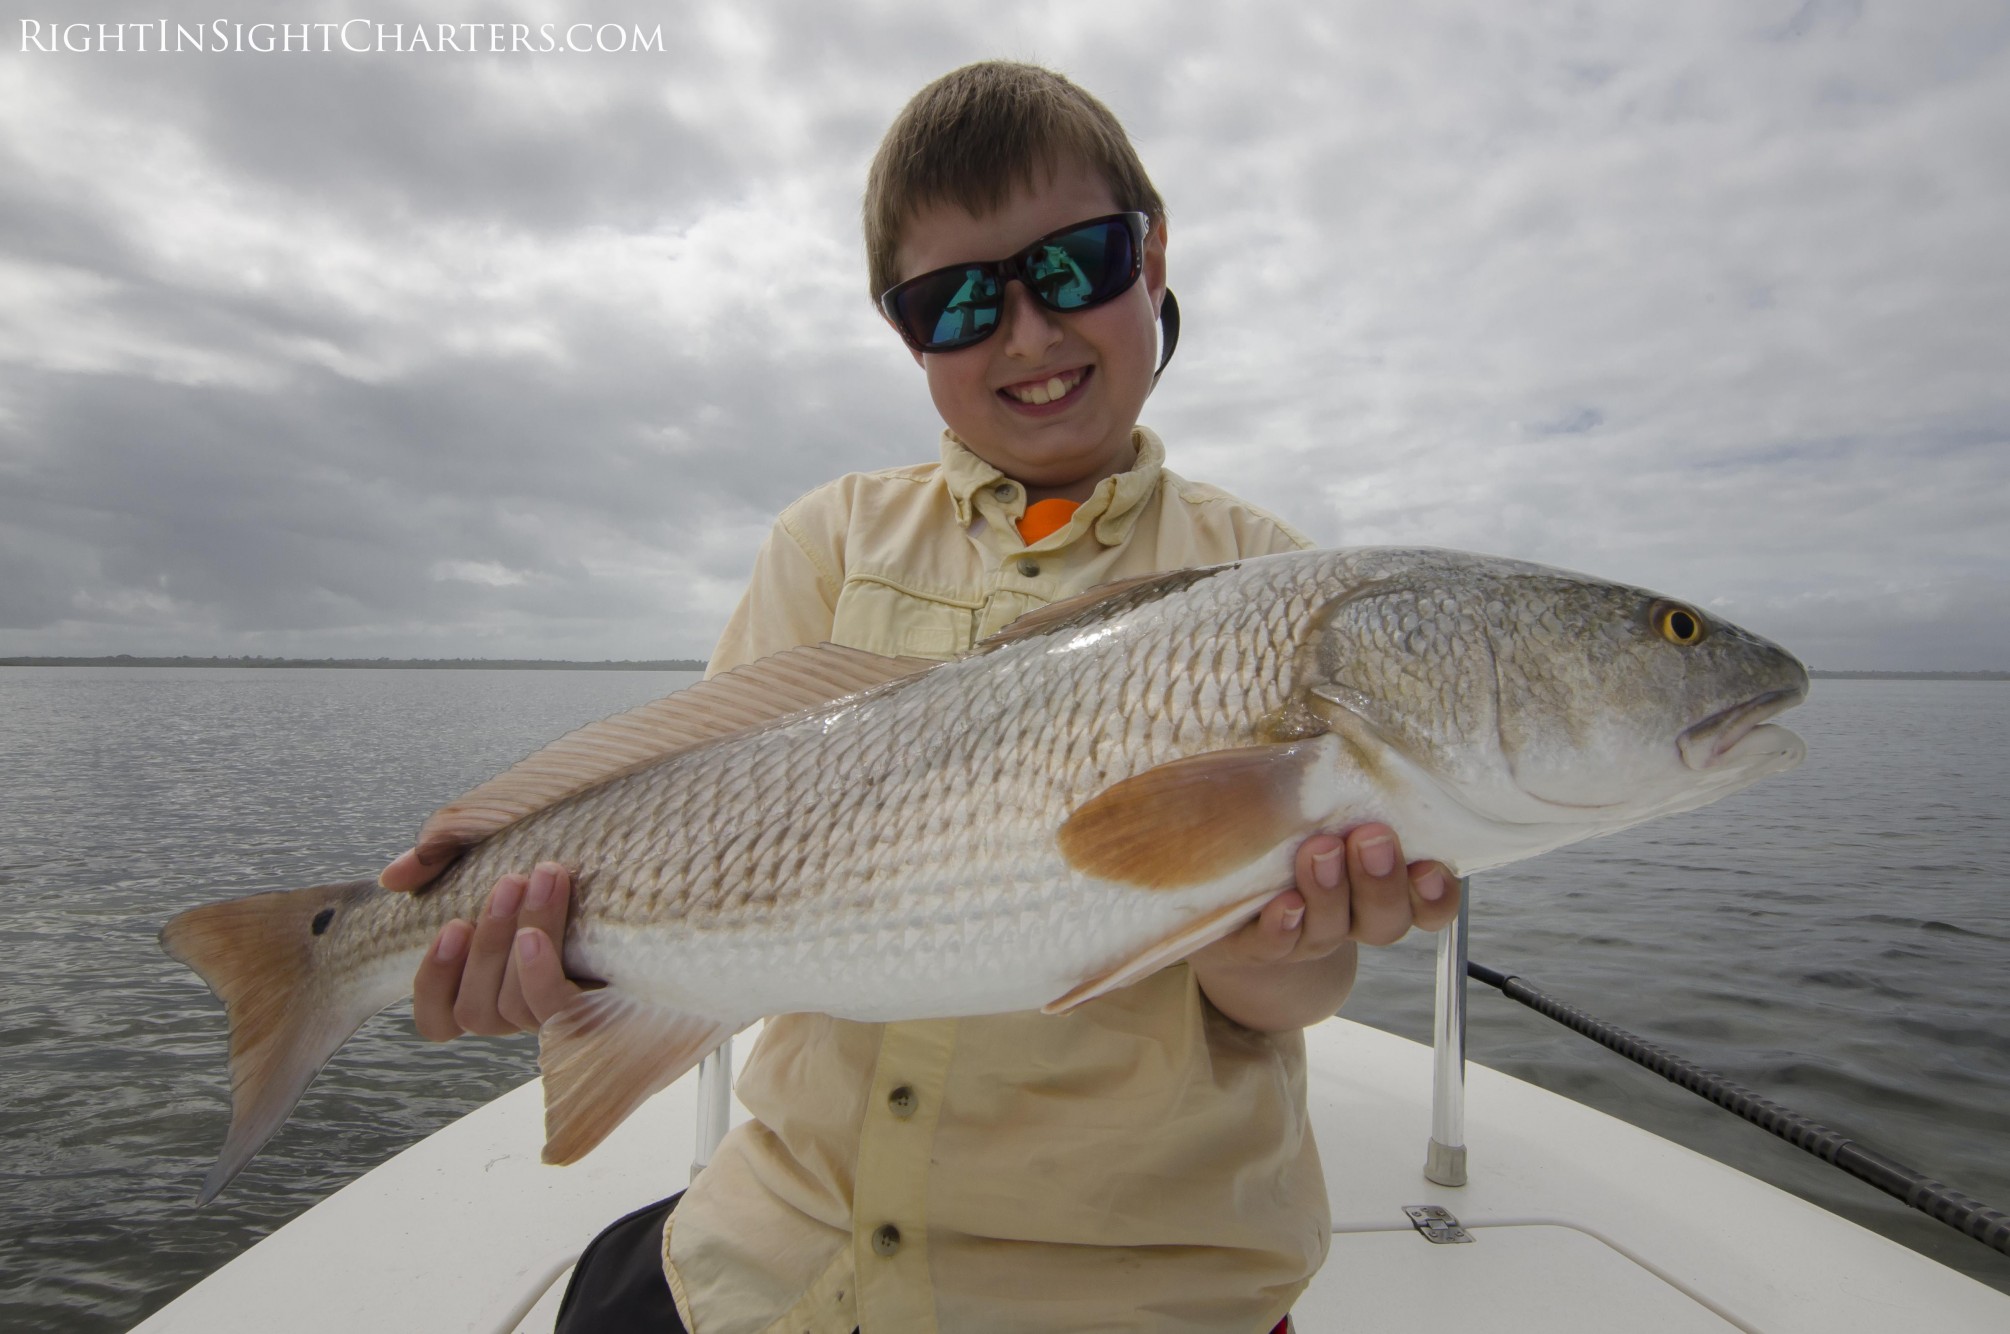 redfish-kids fishing trips-east cape skiffs-right in sight charters-mosquito lagoon-indian river lagoon-new smyrna beach-red drum-sight fishing-flats fishing-space coast